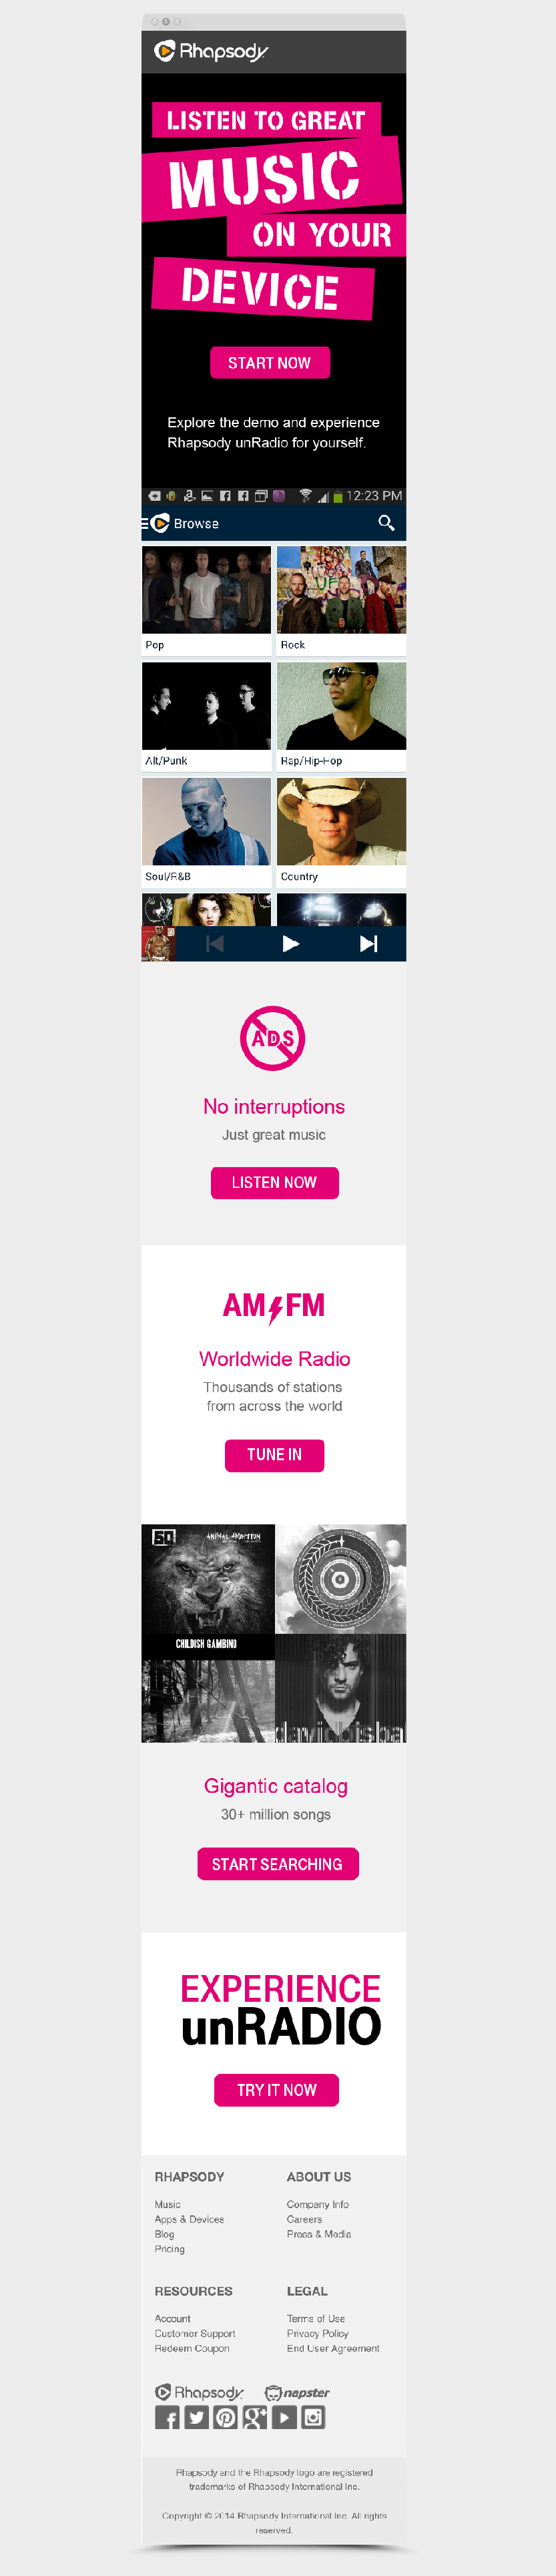 T-Mobile rhapsody unRadio landing page music streaming mobile app movement